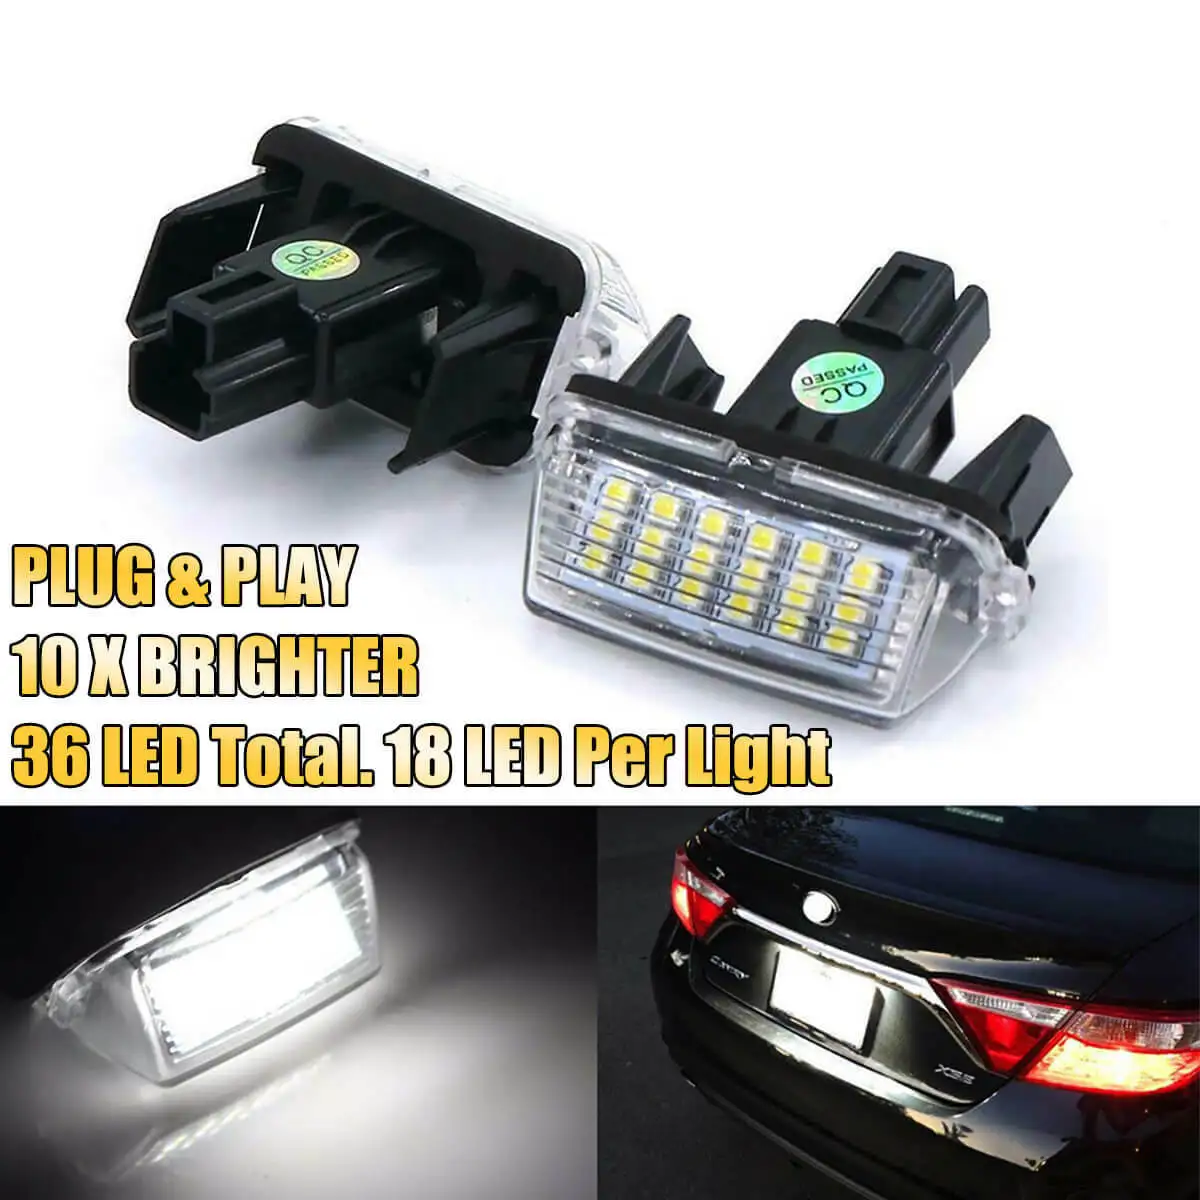 

1pair OEM-Fit 3W Full LED License Plate Light Kit Compatible With Toyota Camry Highlander Prius C Avalon Yaris